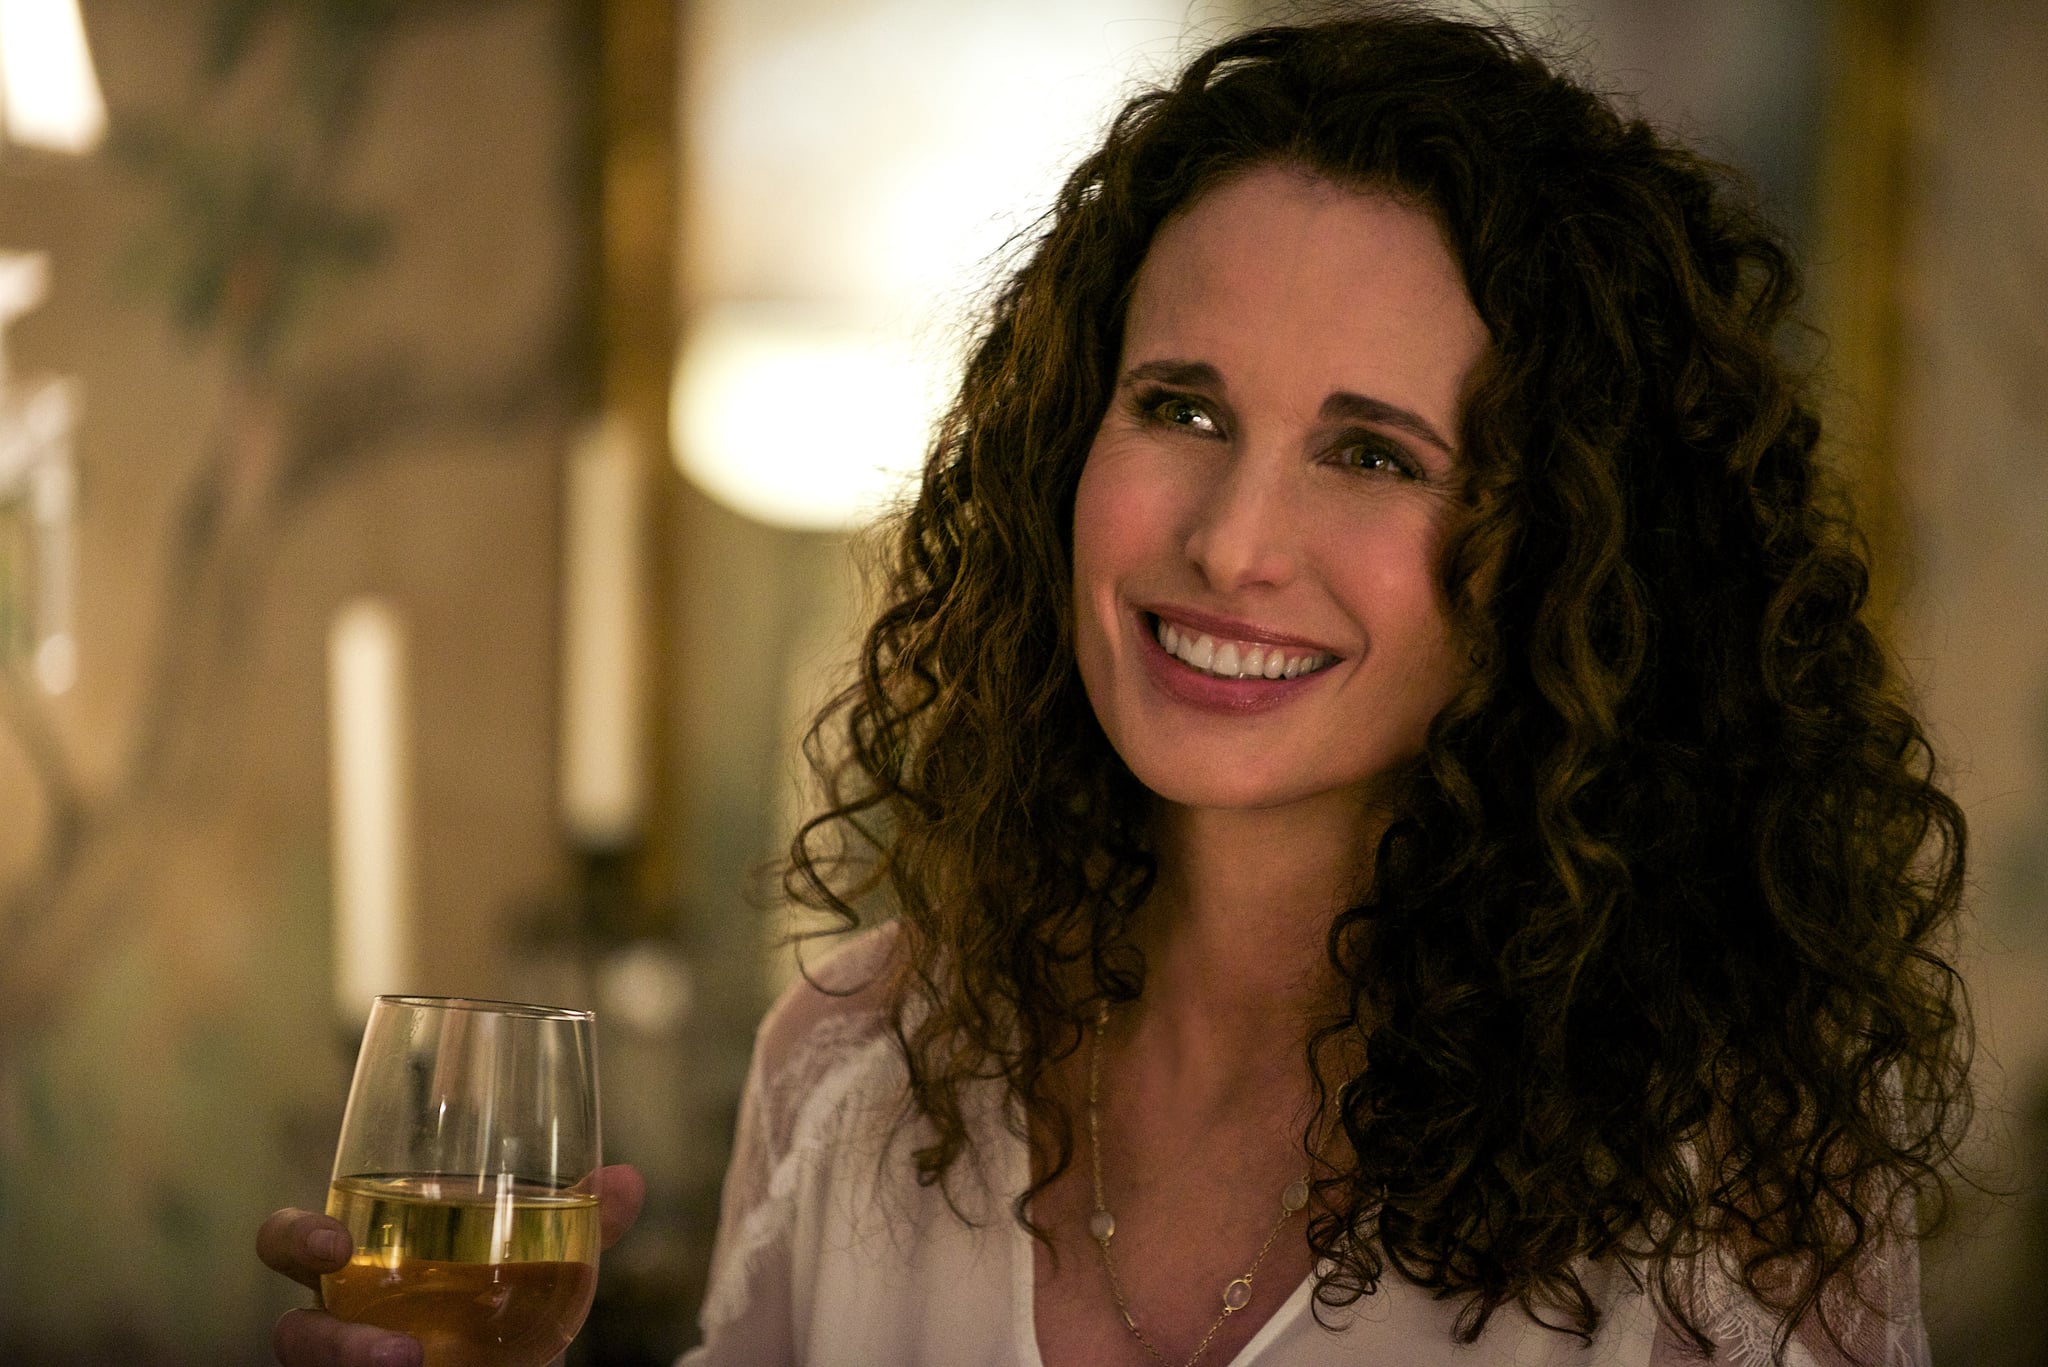 Andie macdowell sexy Groundhog Day: